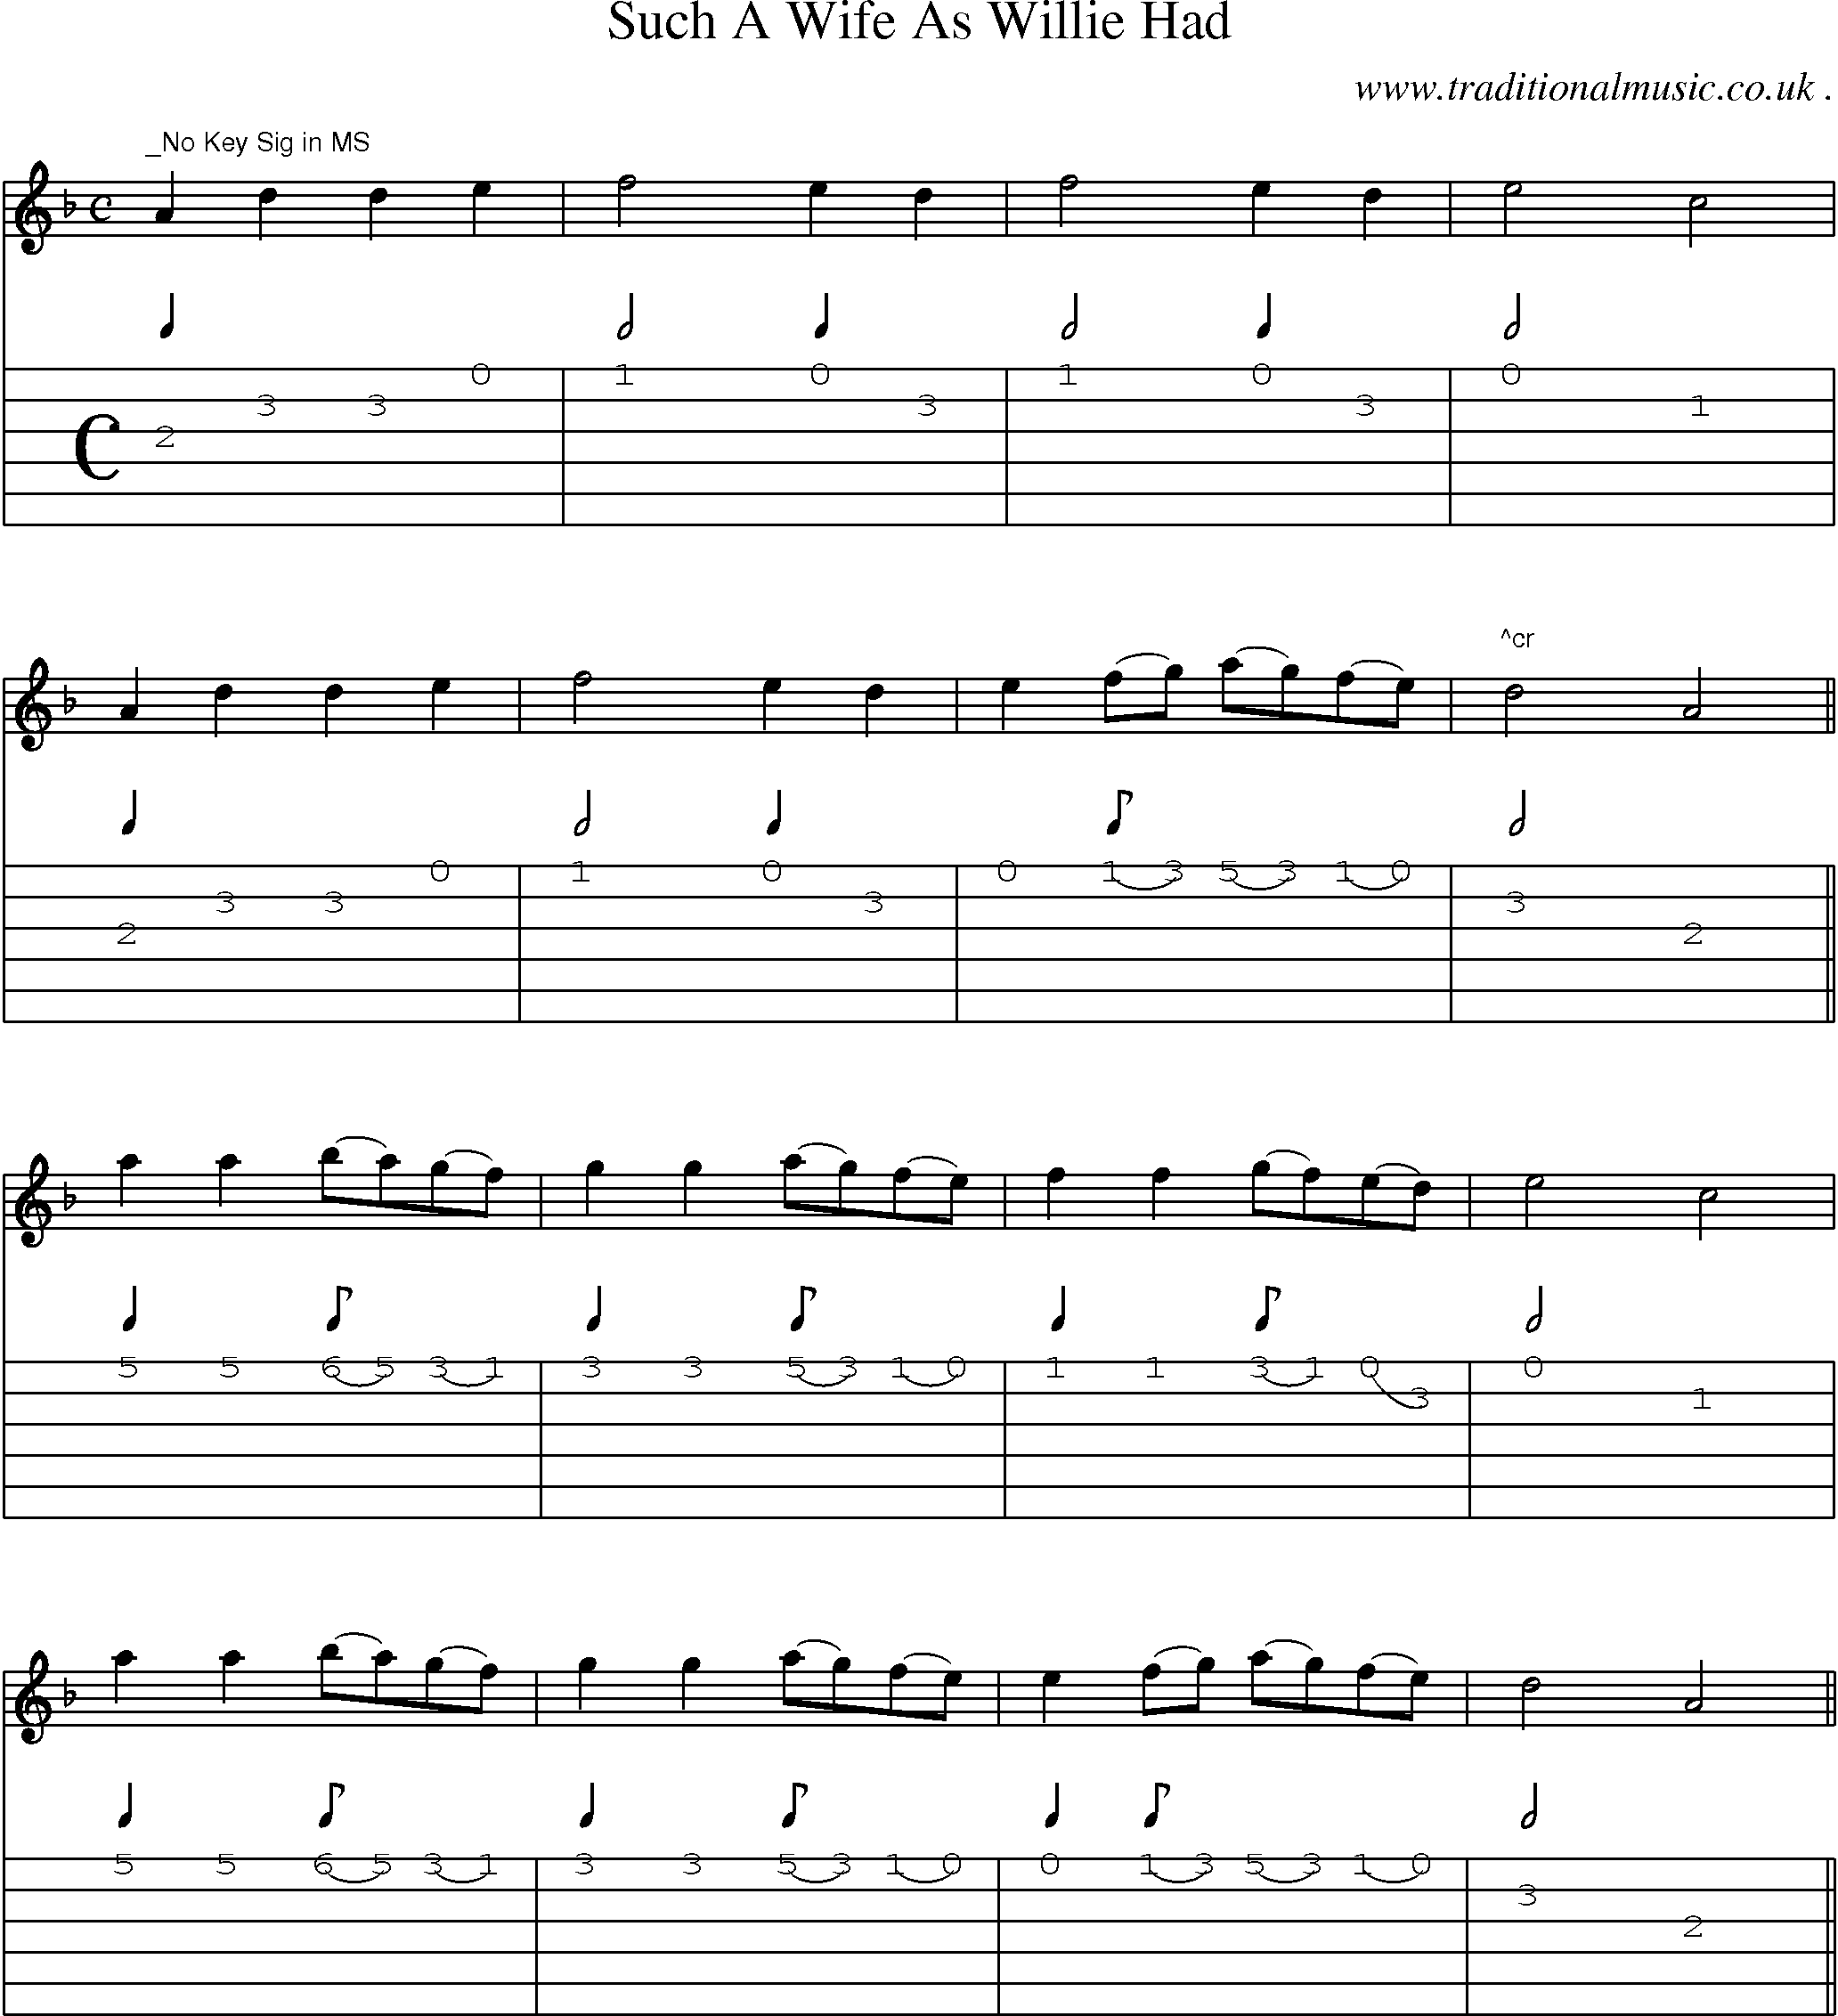 Sheet-Music and Guitar Tabs for Such A Wife As Willie Had